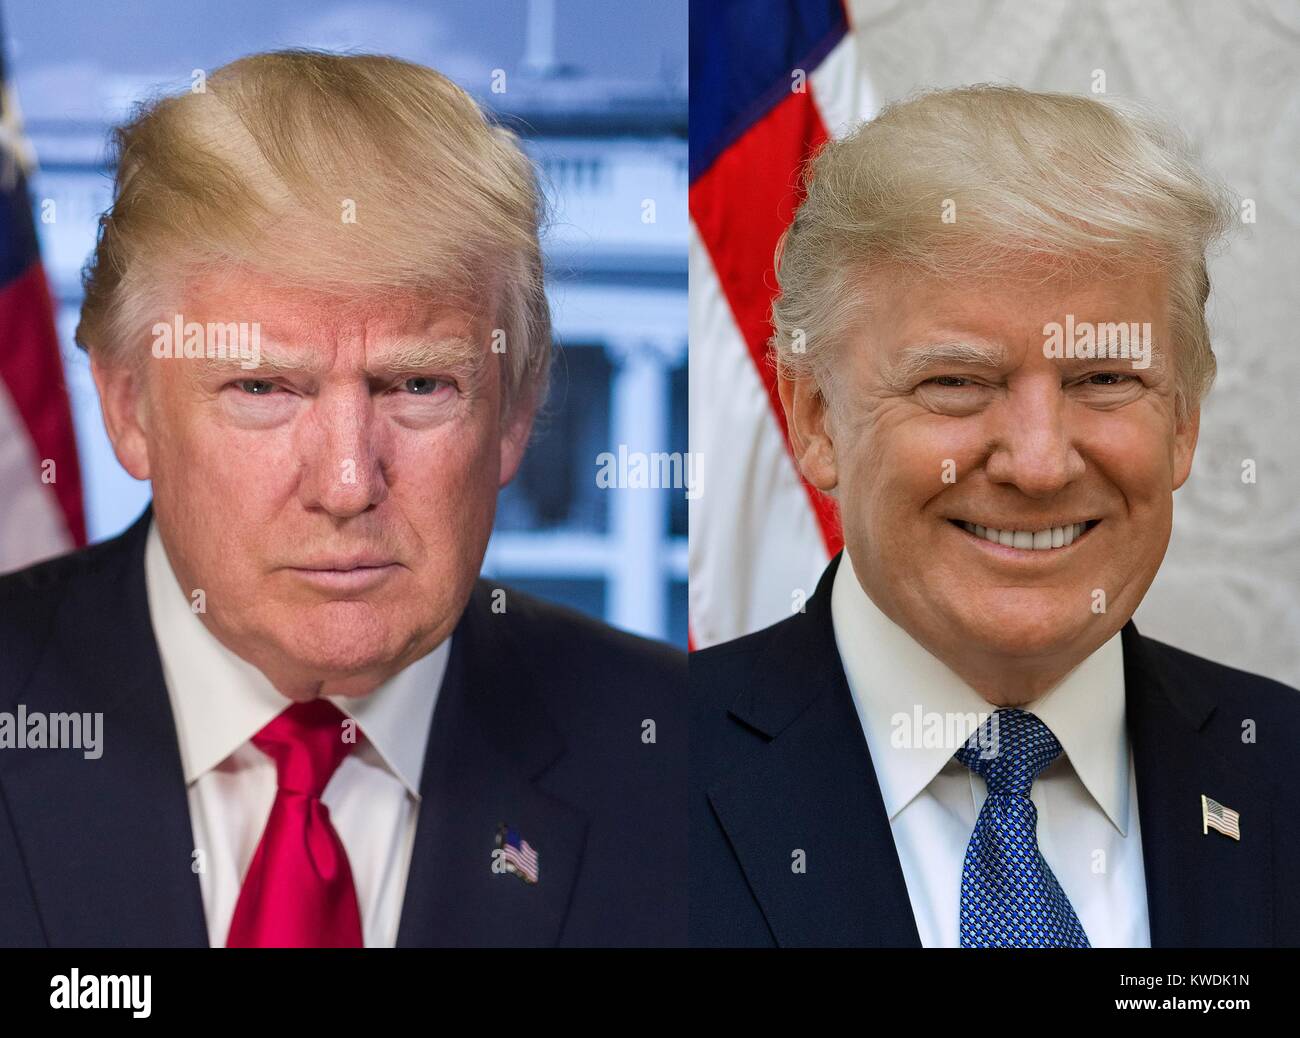 Contrasting portraits of President Donald Trump used by the White House in 2017. Image on left was taken in Dec. 2016, prior to his inauguration, and has the flag and White House digitally added as a backdrop. It was used on the White House website presidential biography, until it was replace by the smiling portrait on the right on October, 31, 2017. There is evidence of cosmetic digital retouching in the portrait on right (BSLOC 2017 18 154) Stock Photo